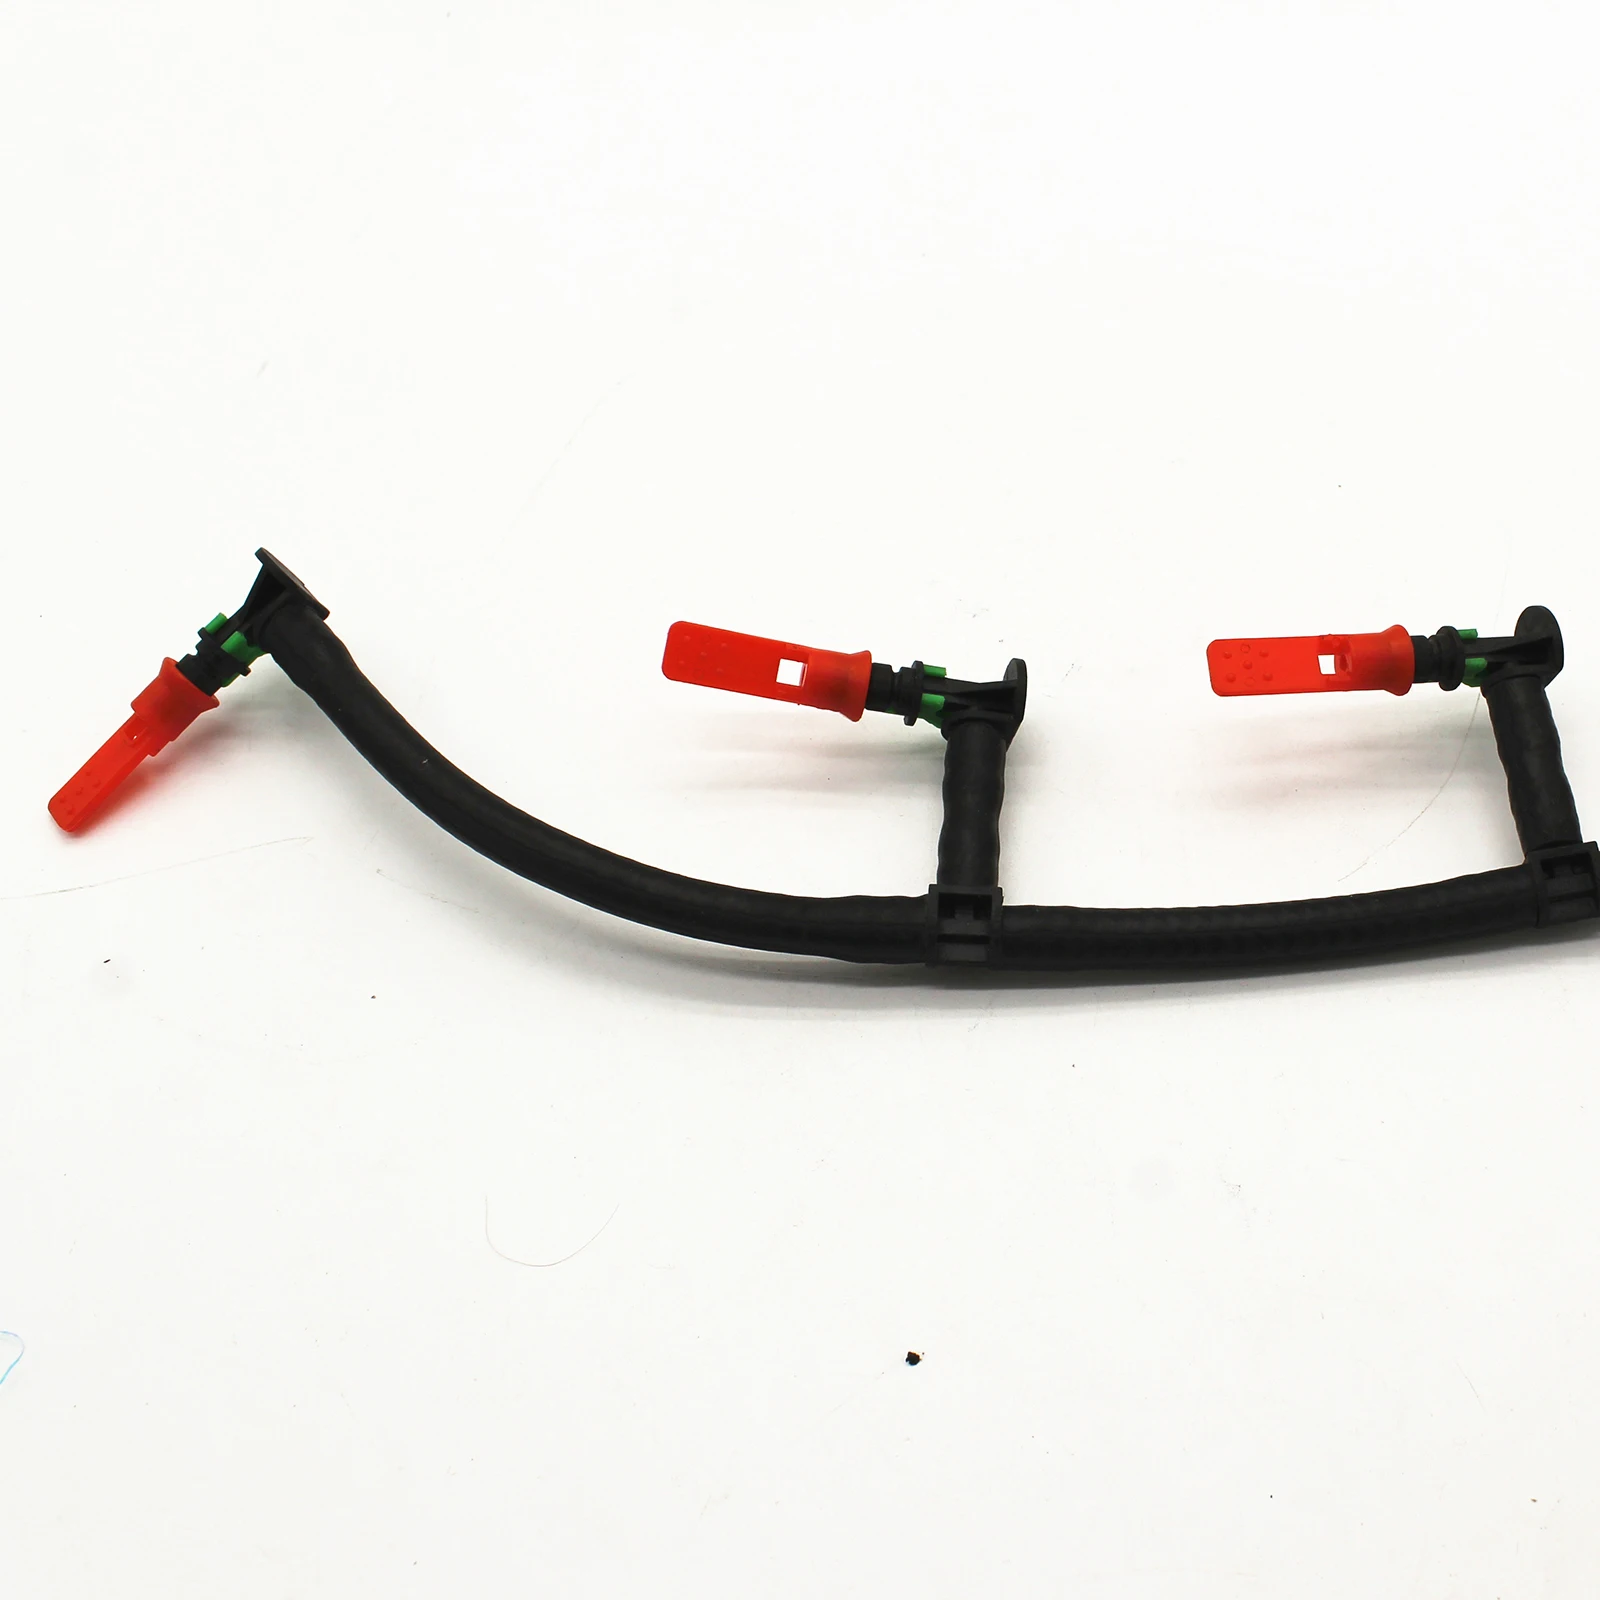 Injector  Fuel Leak off Pipe Hose w/Clips 1761932 Fits for Land Rover Defender 2.2 Rwd Td4, An essential tool in life